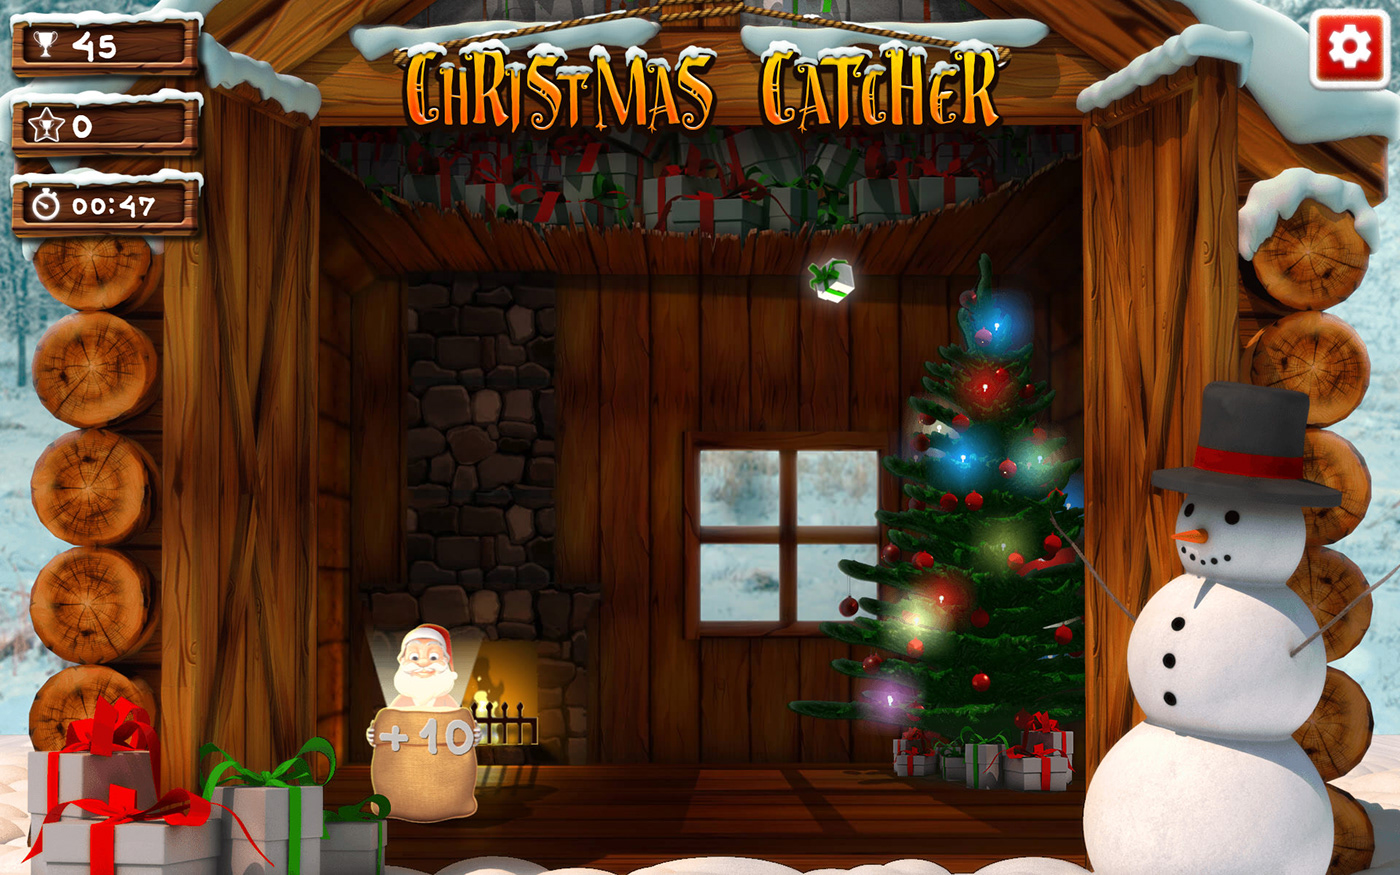 html5 game Christmas xmas advergame seasonal game promotion game catcher game classic game casual game babbo natale